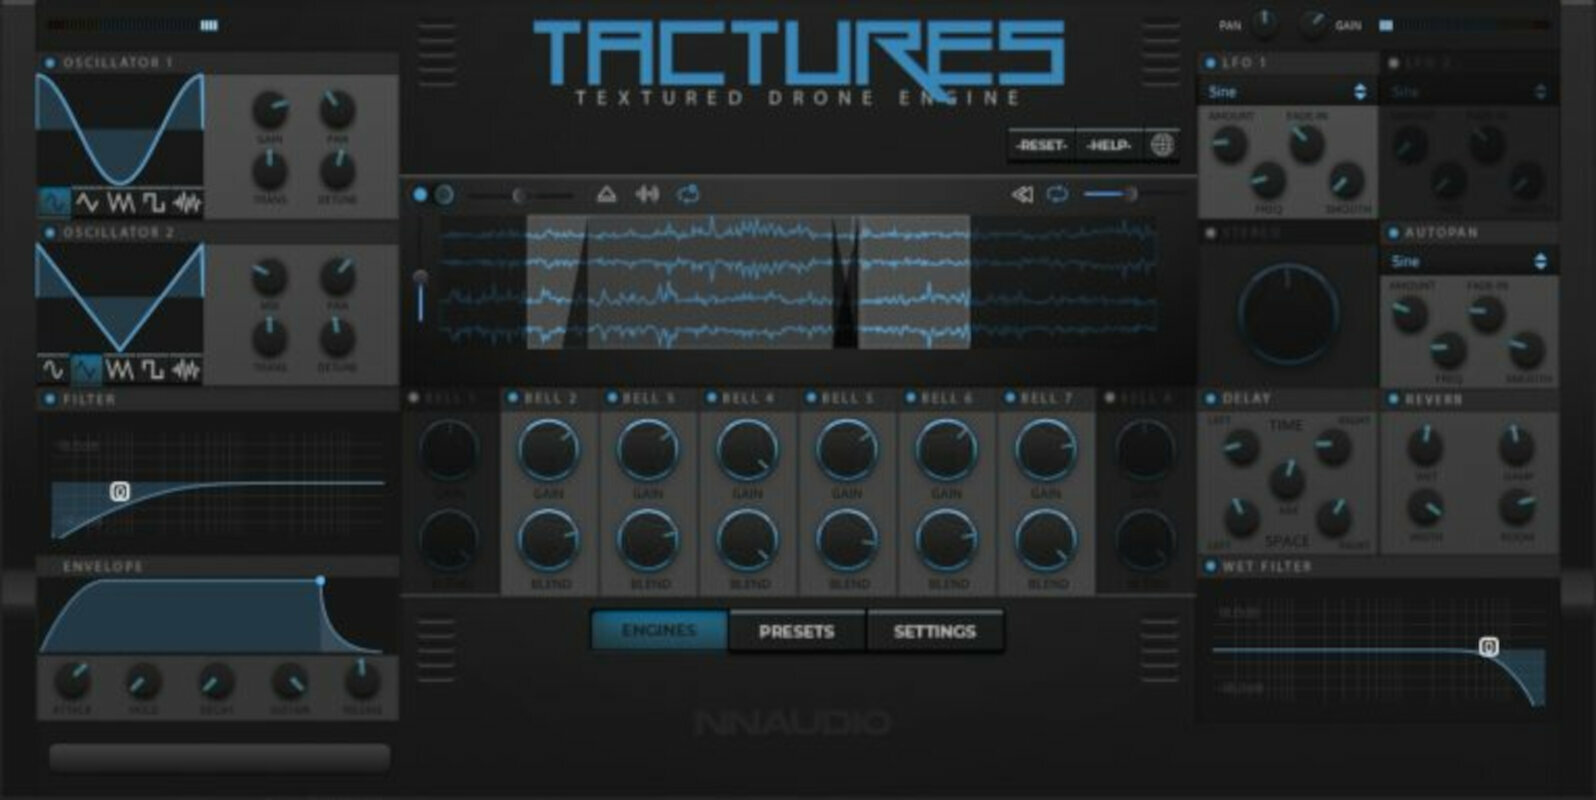 Effect Plug-In New Nation Tactures - Textured Drone Engine (Digital product)